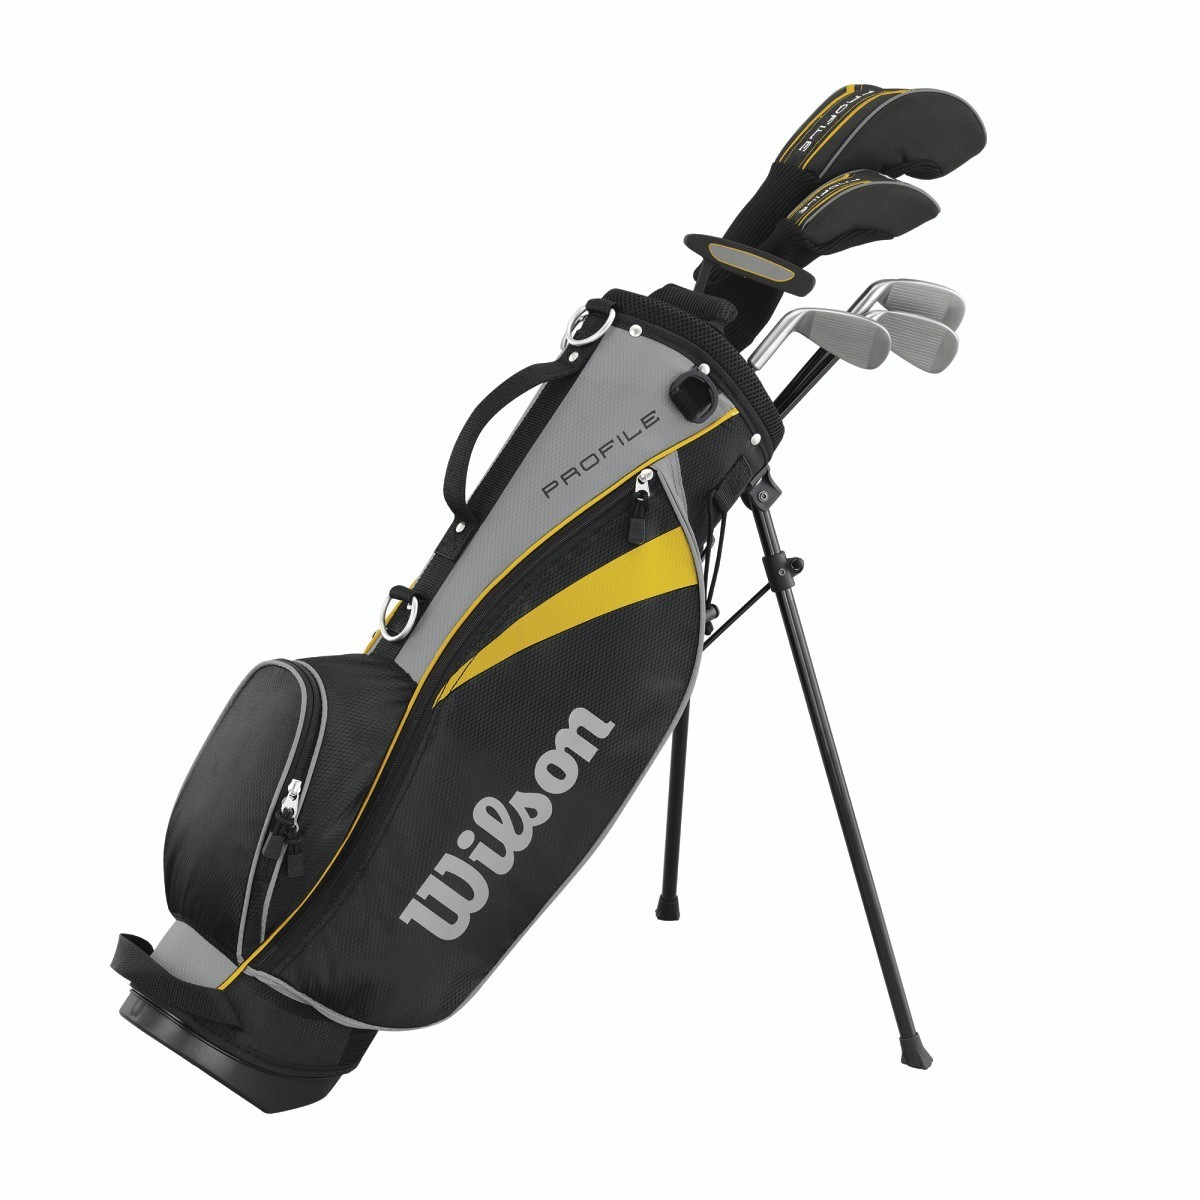 BUY GOLF BAG ONLINE, USED AND NEW